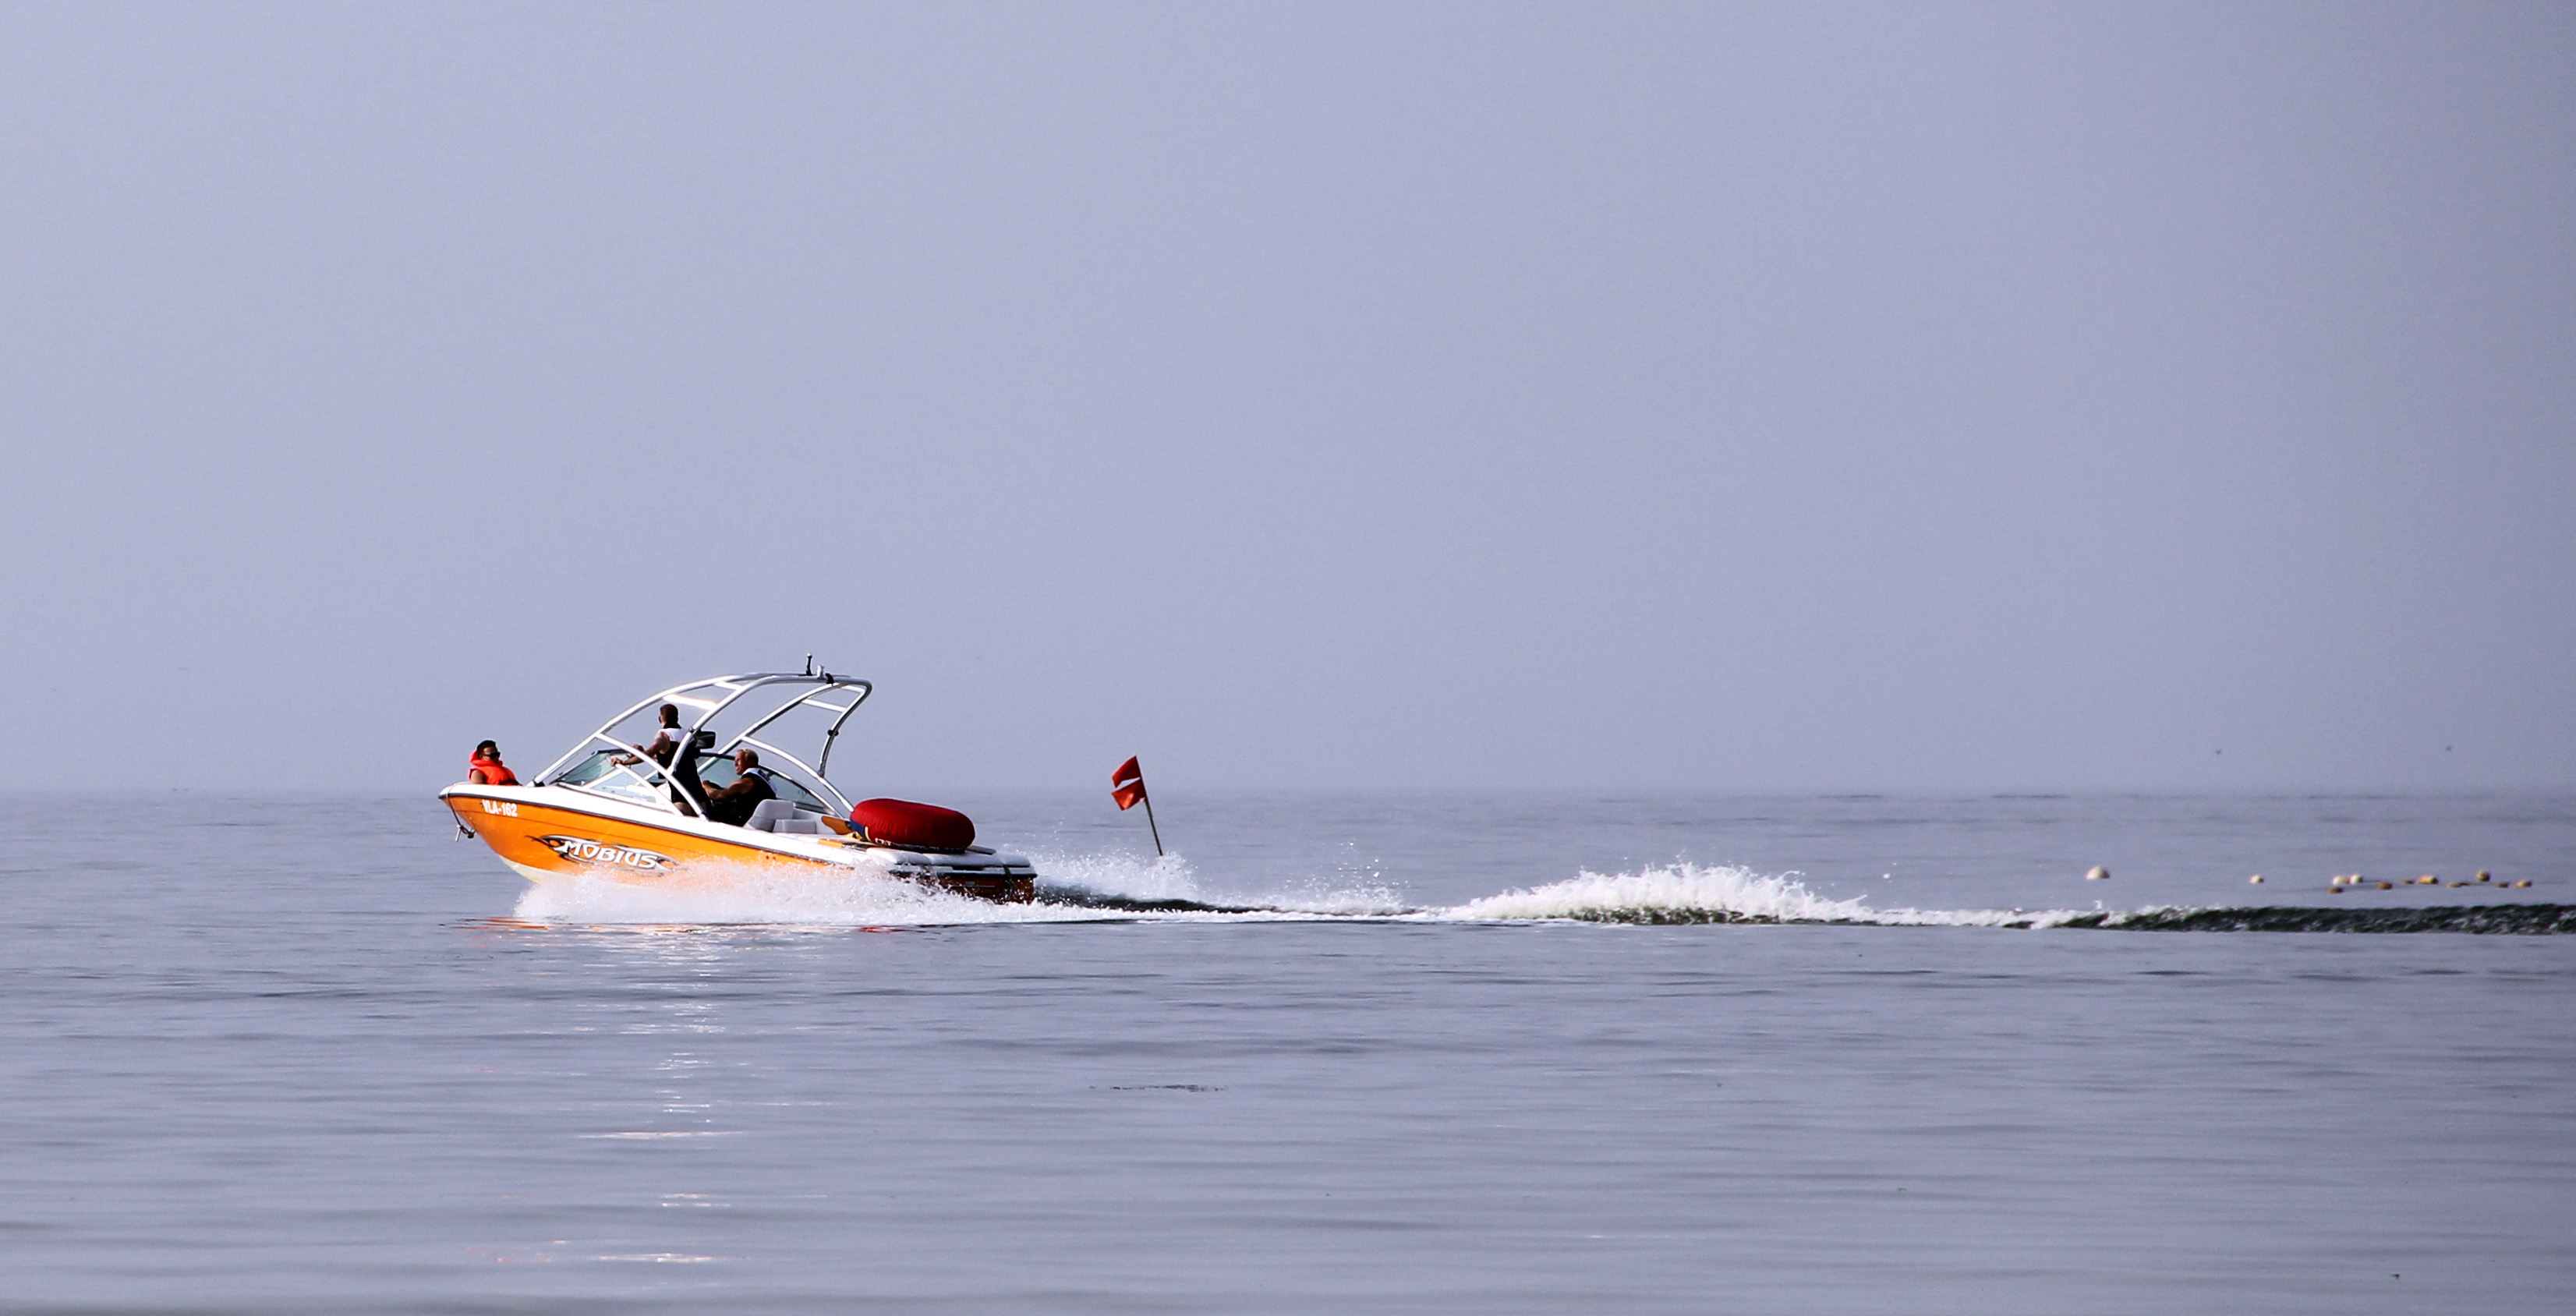 Image of a speedboat in action.